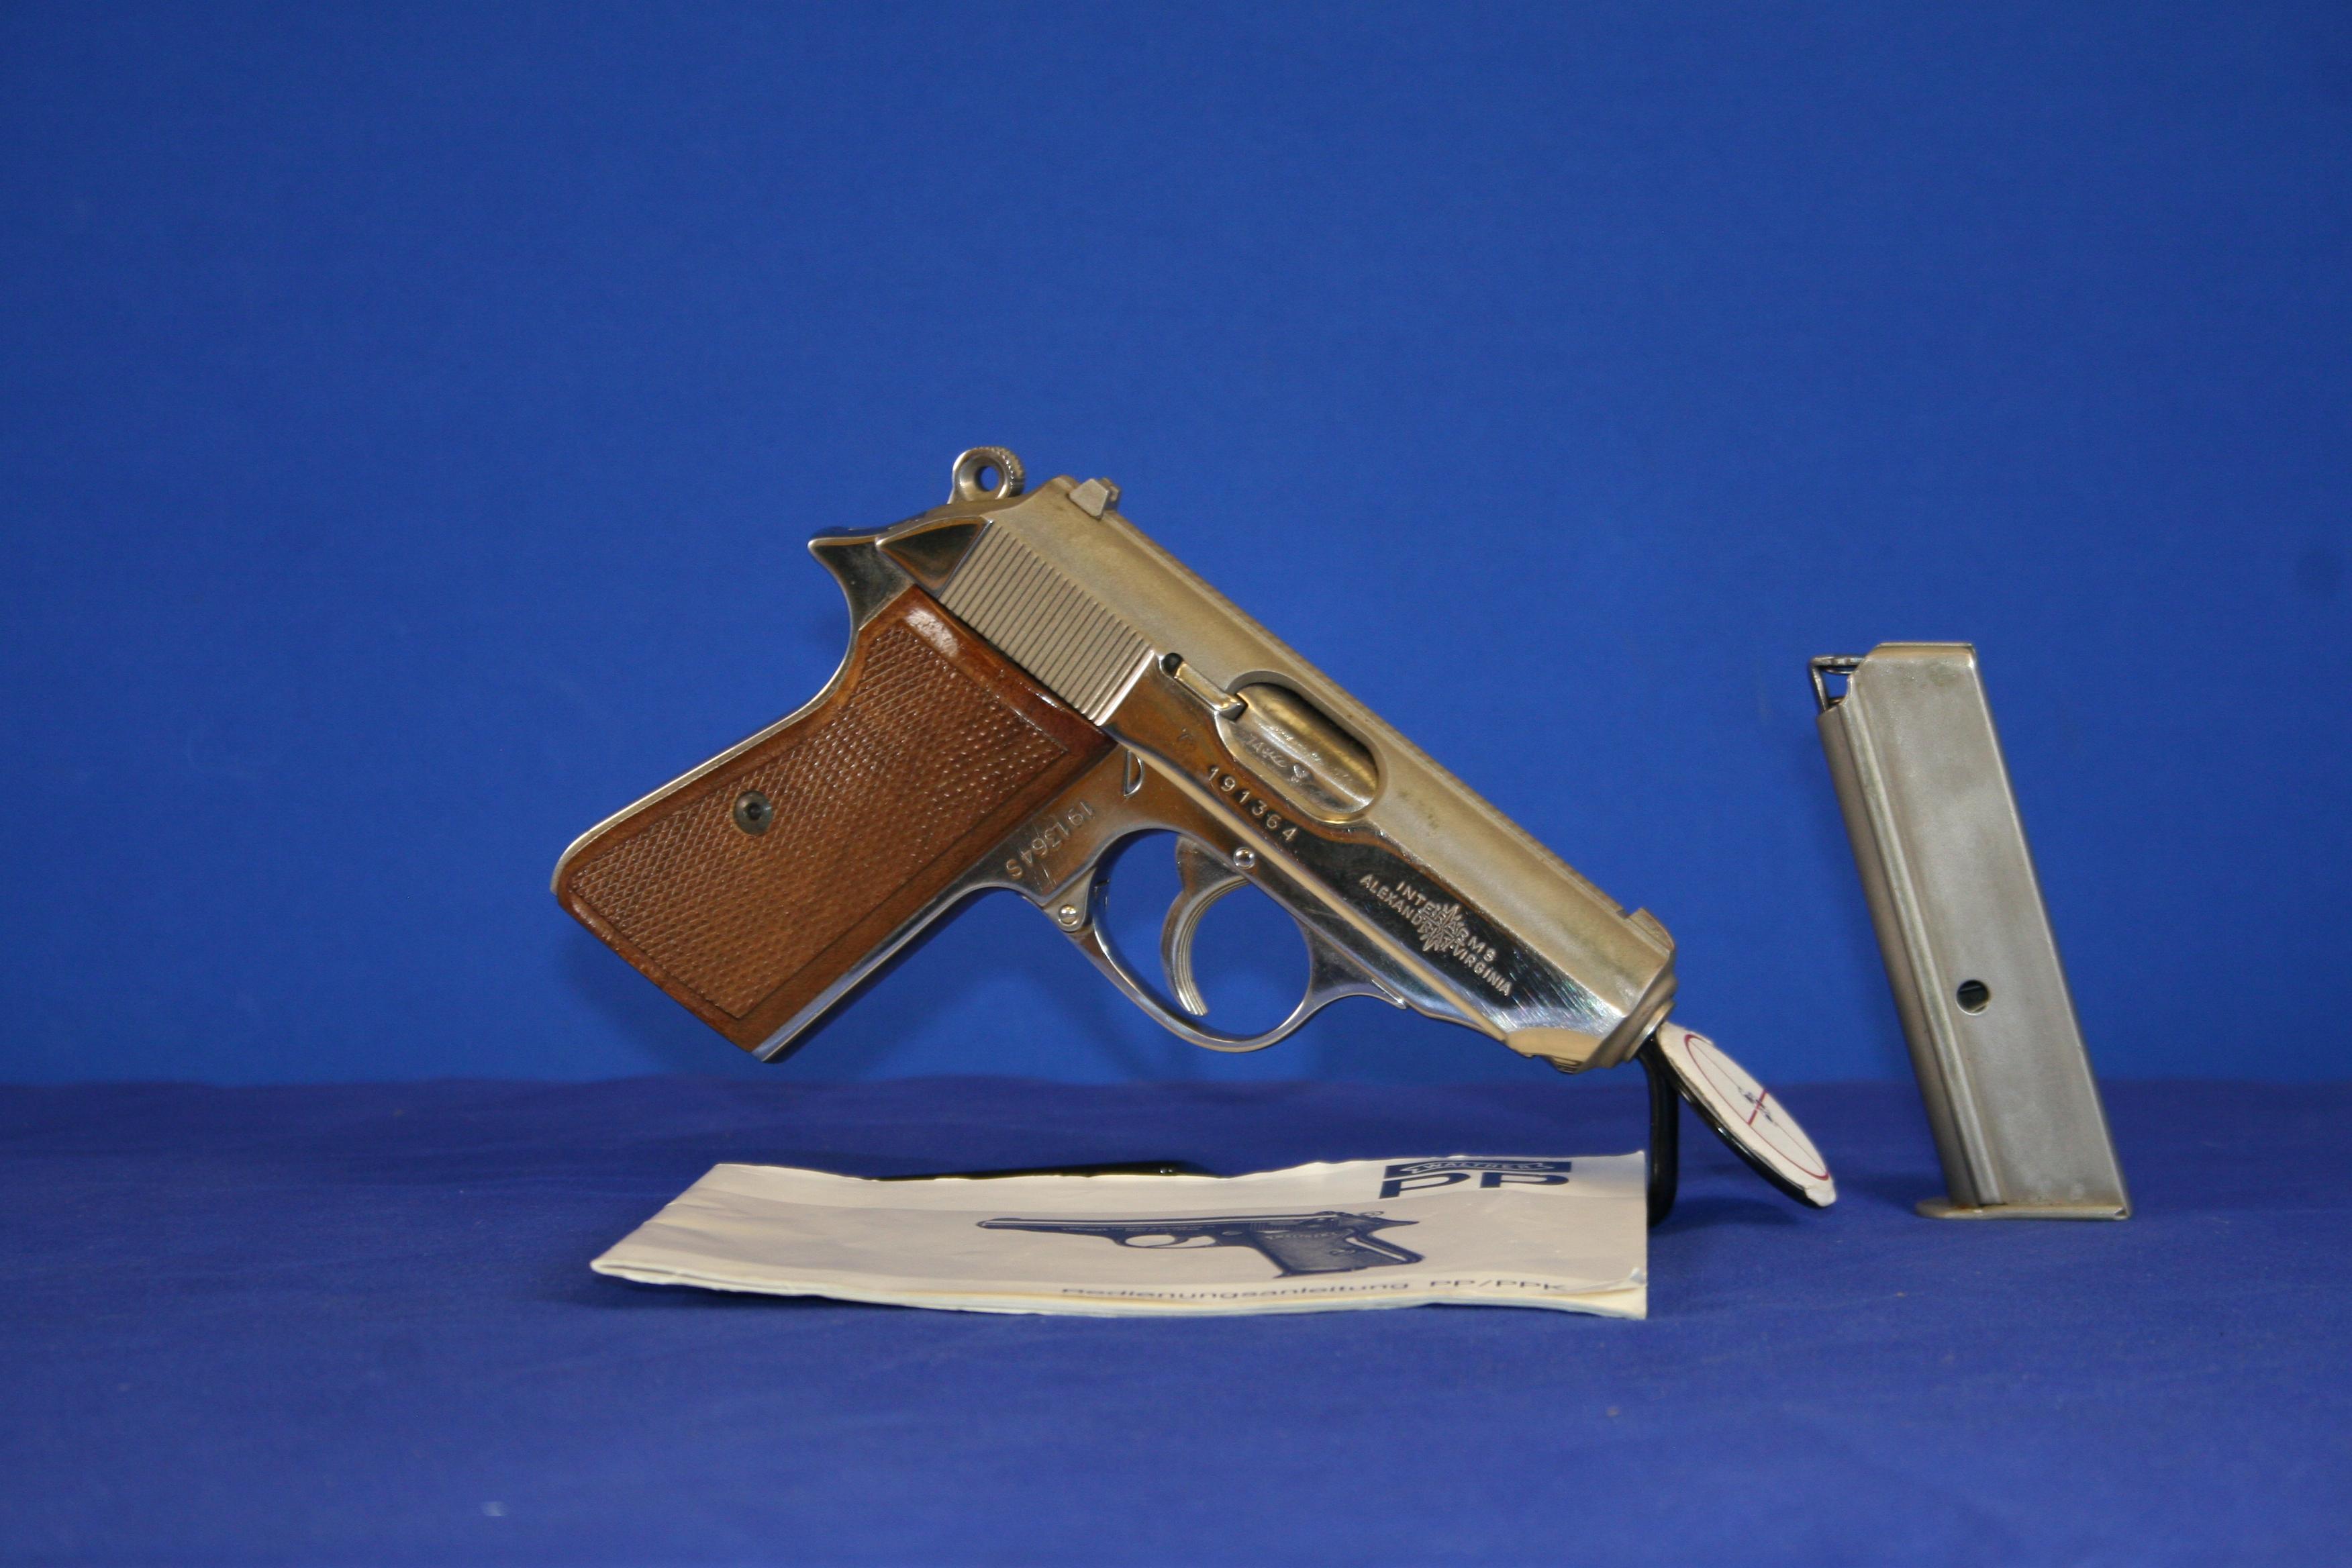 Walther PPK 380 ACP. SN#191364. Not Legal For Sale In California.